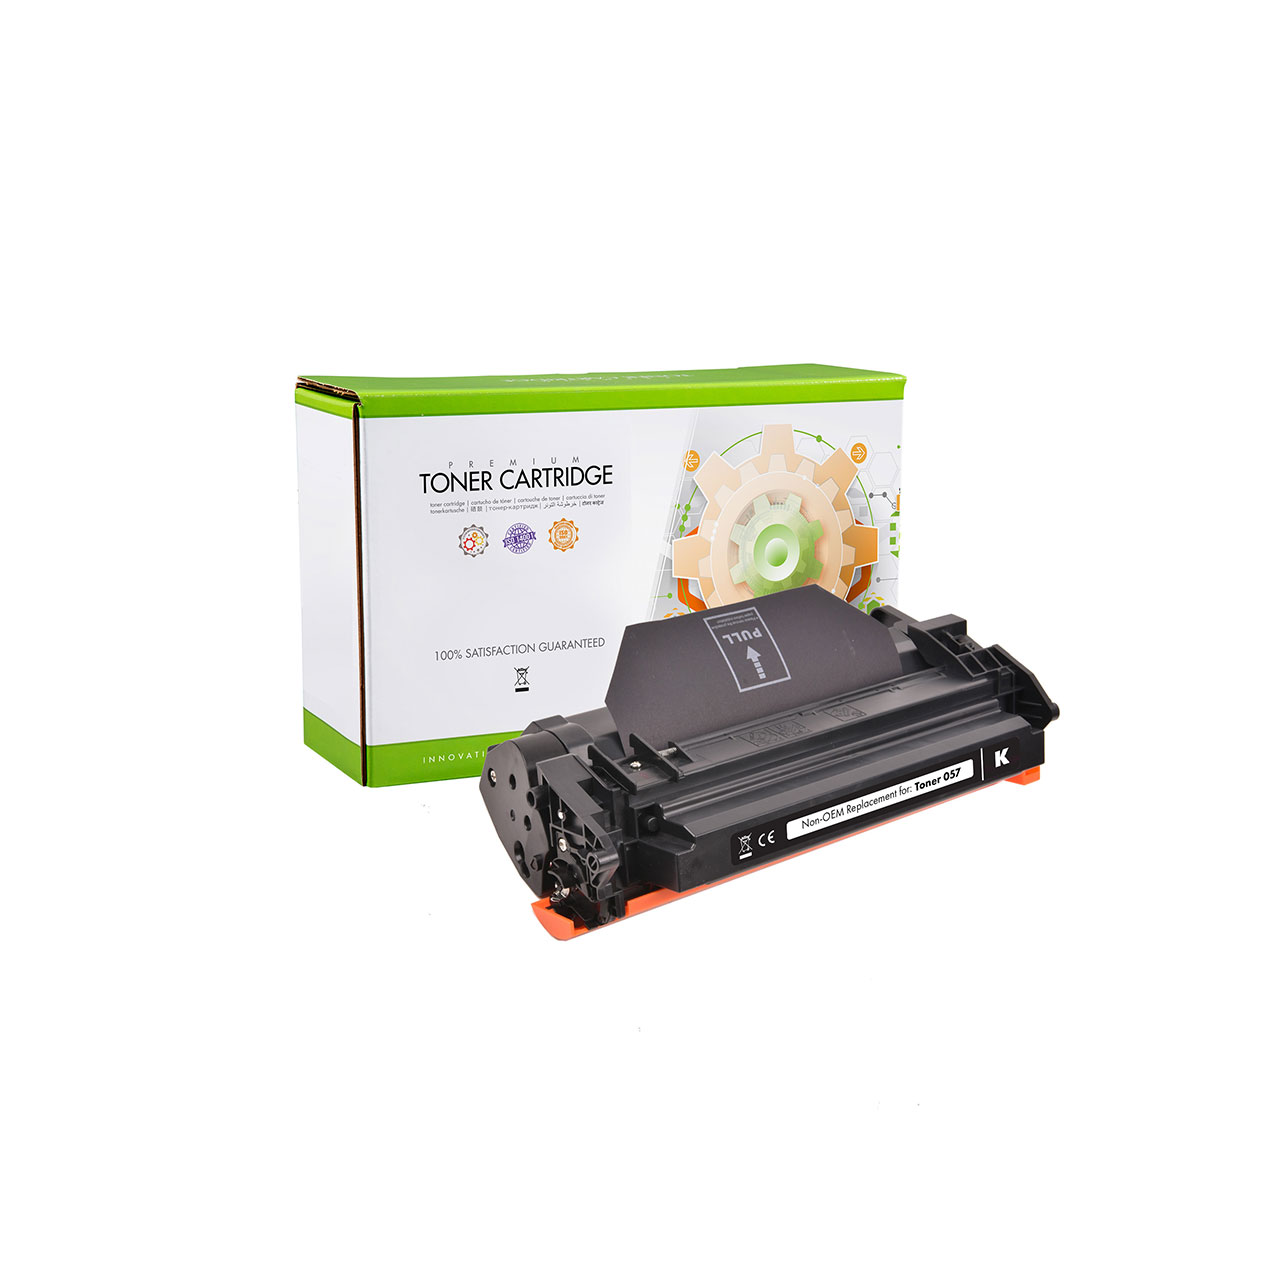 Static Control® toner cartridge replacement for Canon 057